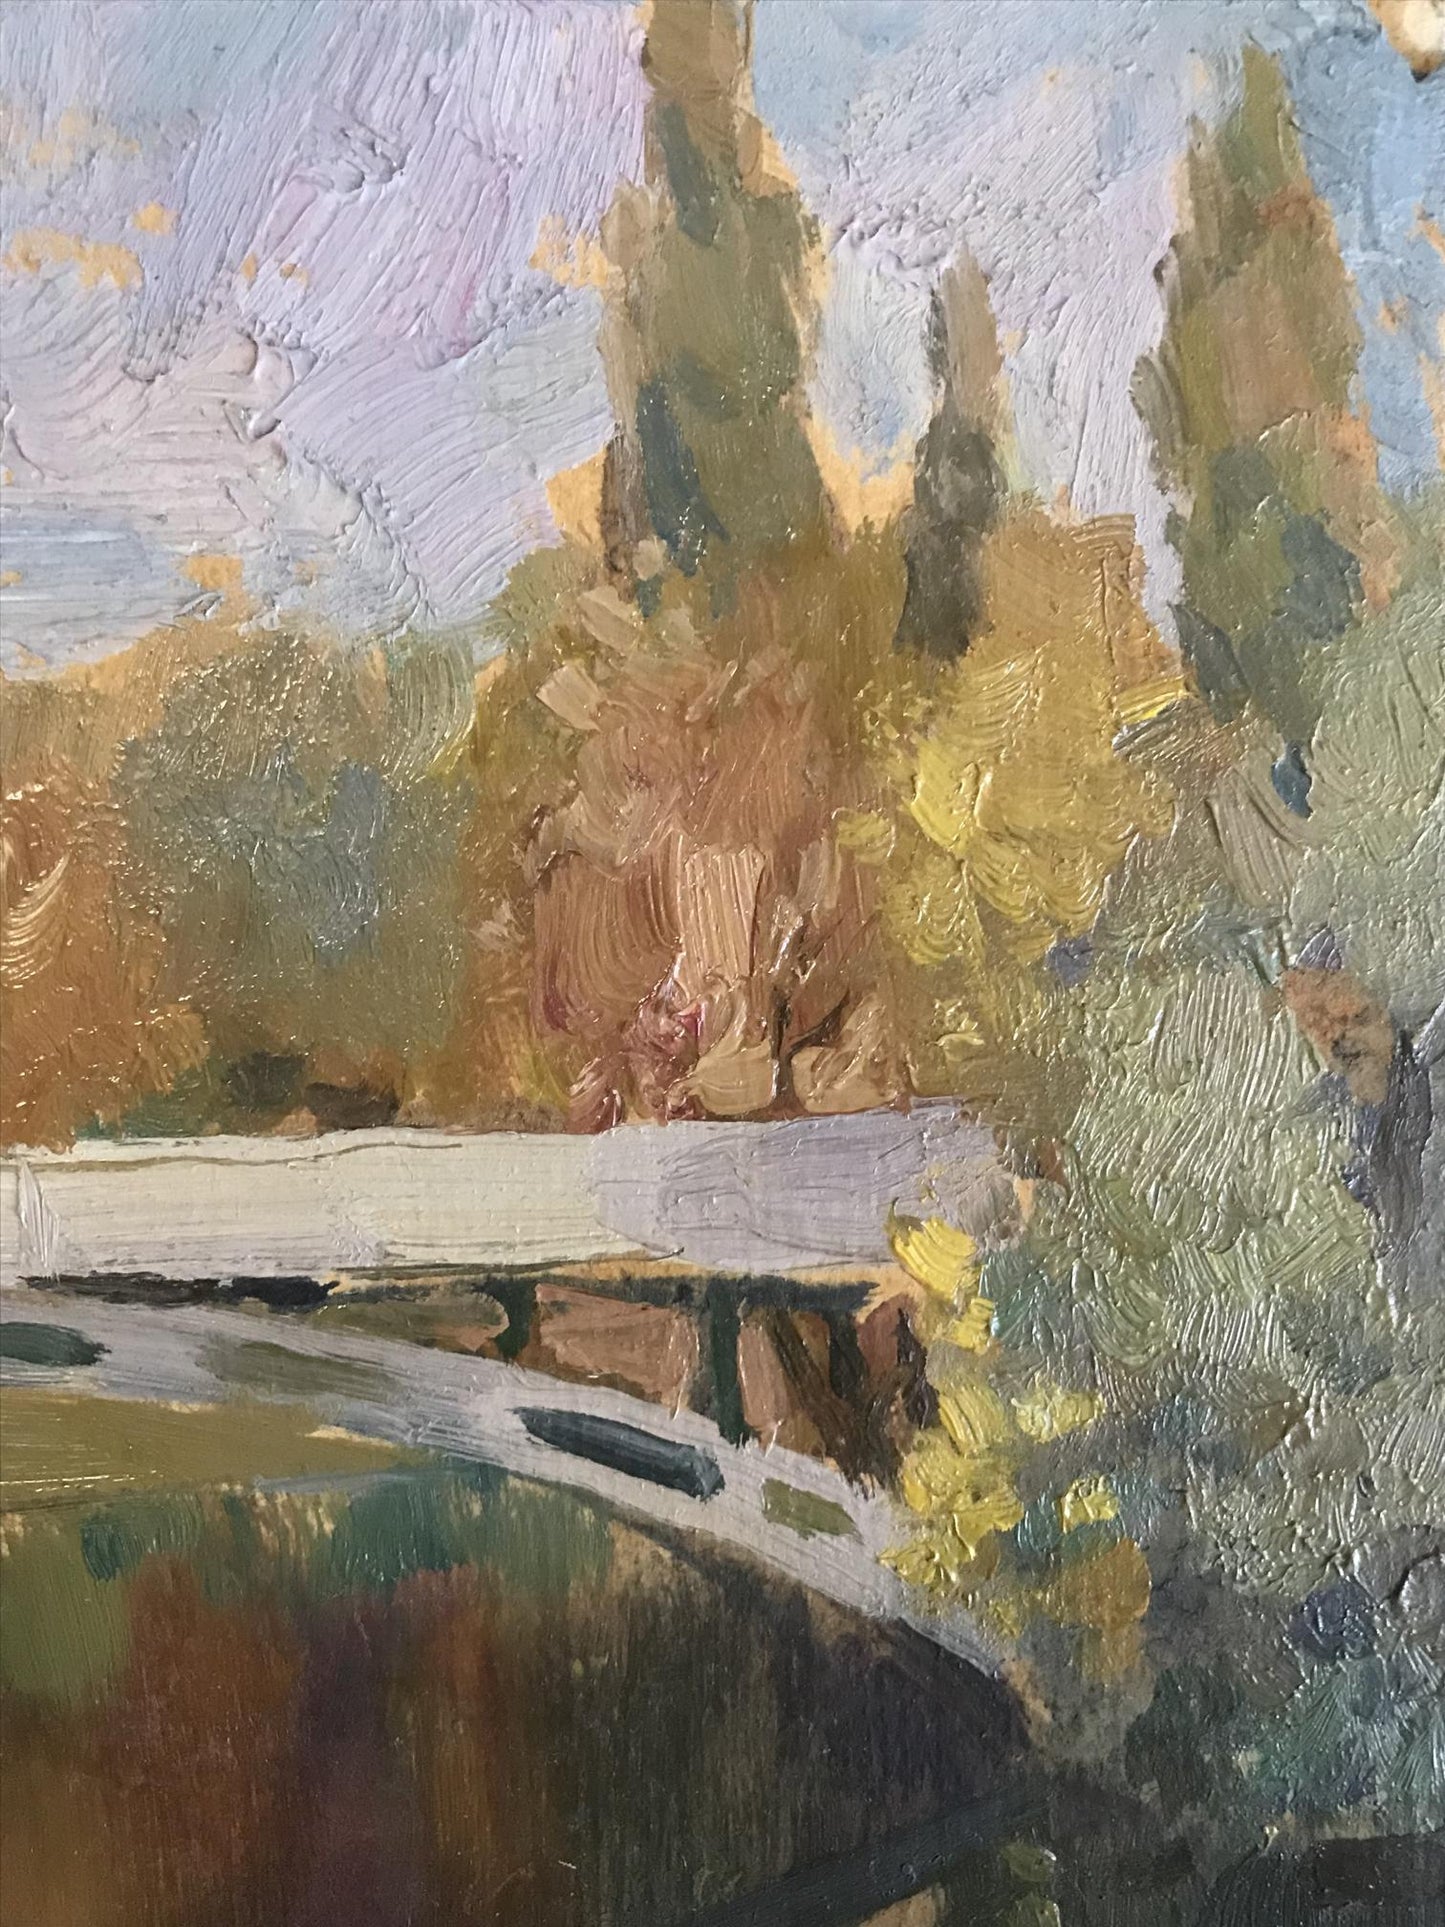 The painting invites viewers to imagine crossing the bridge and exploring the landscape beyond